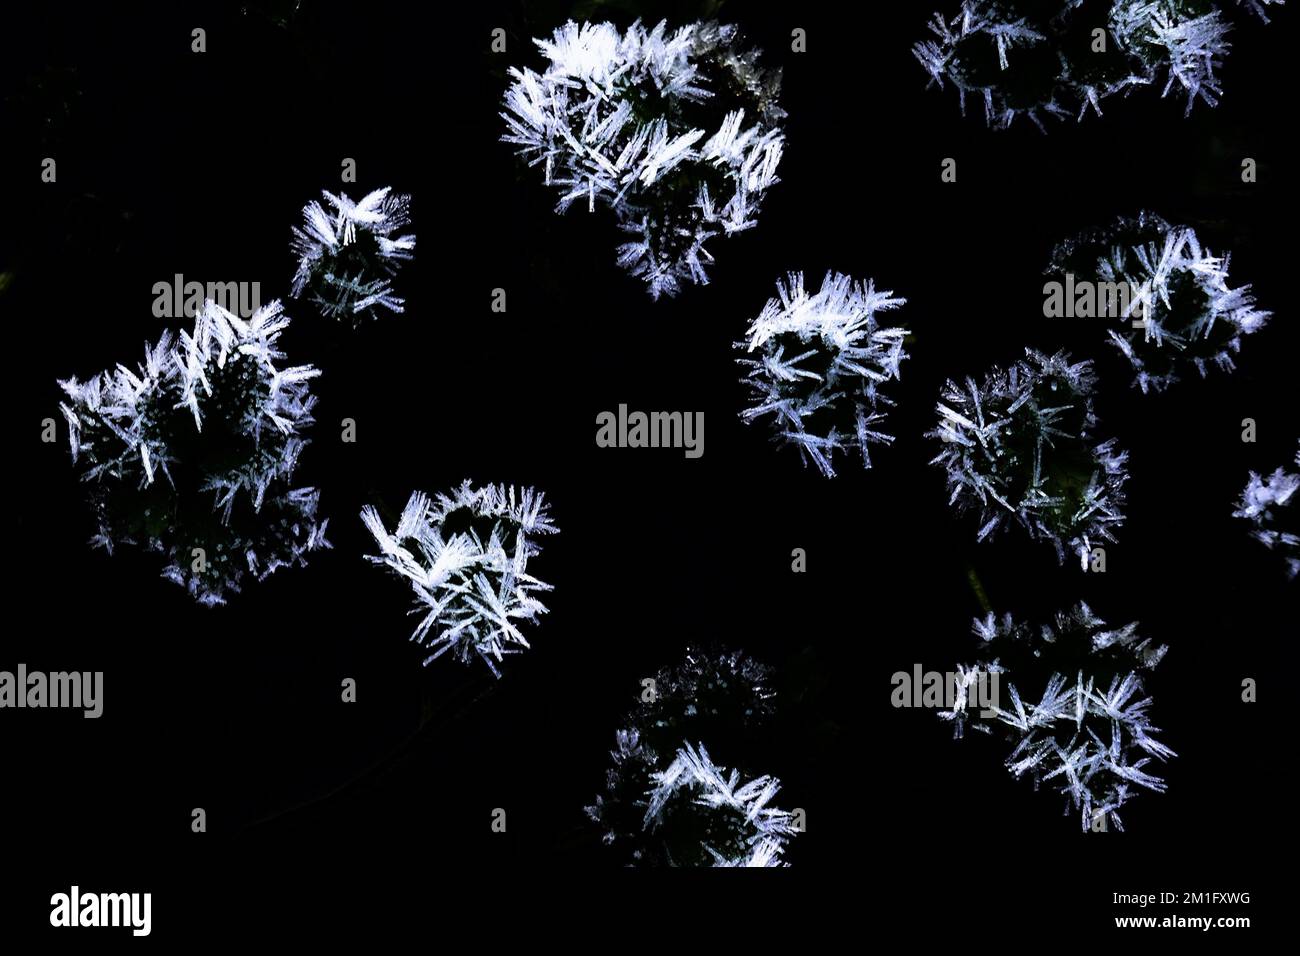 Ice crystals on plants in water, top down view Stock Photo